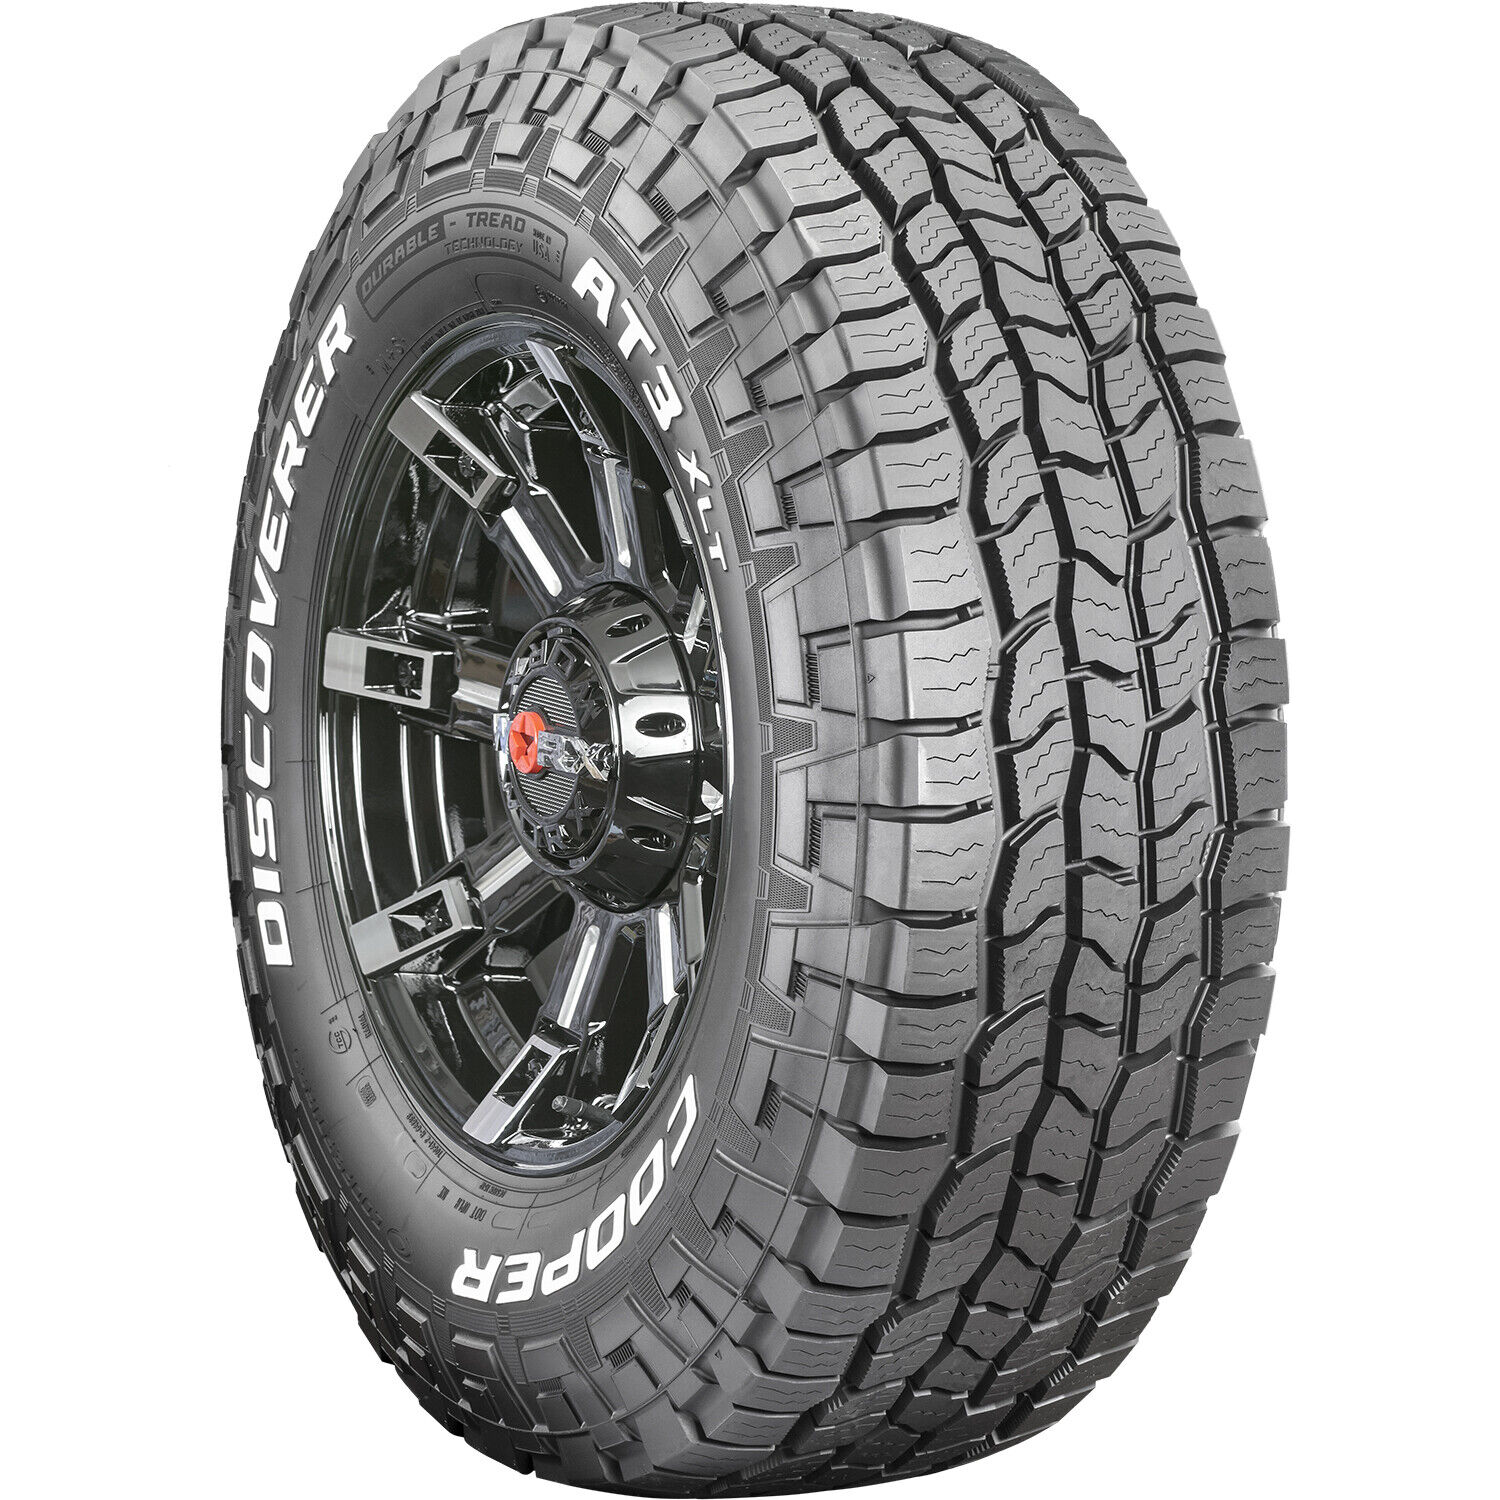 Tire Cooper Discoverer AT3 XLT LT 265/70R18 124/121S E 10 Ply A/T All Terrain